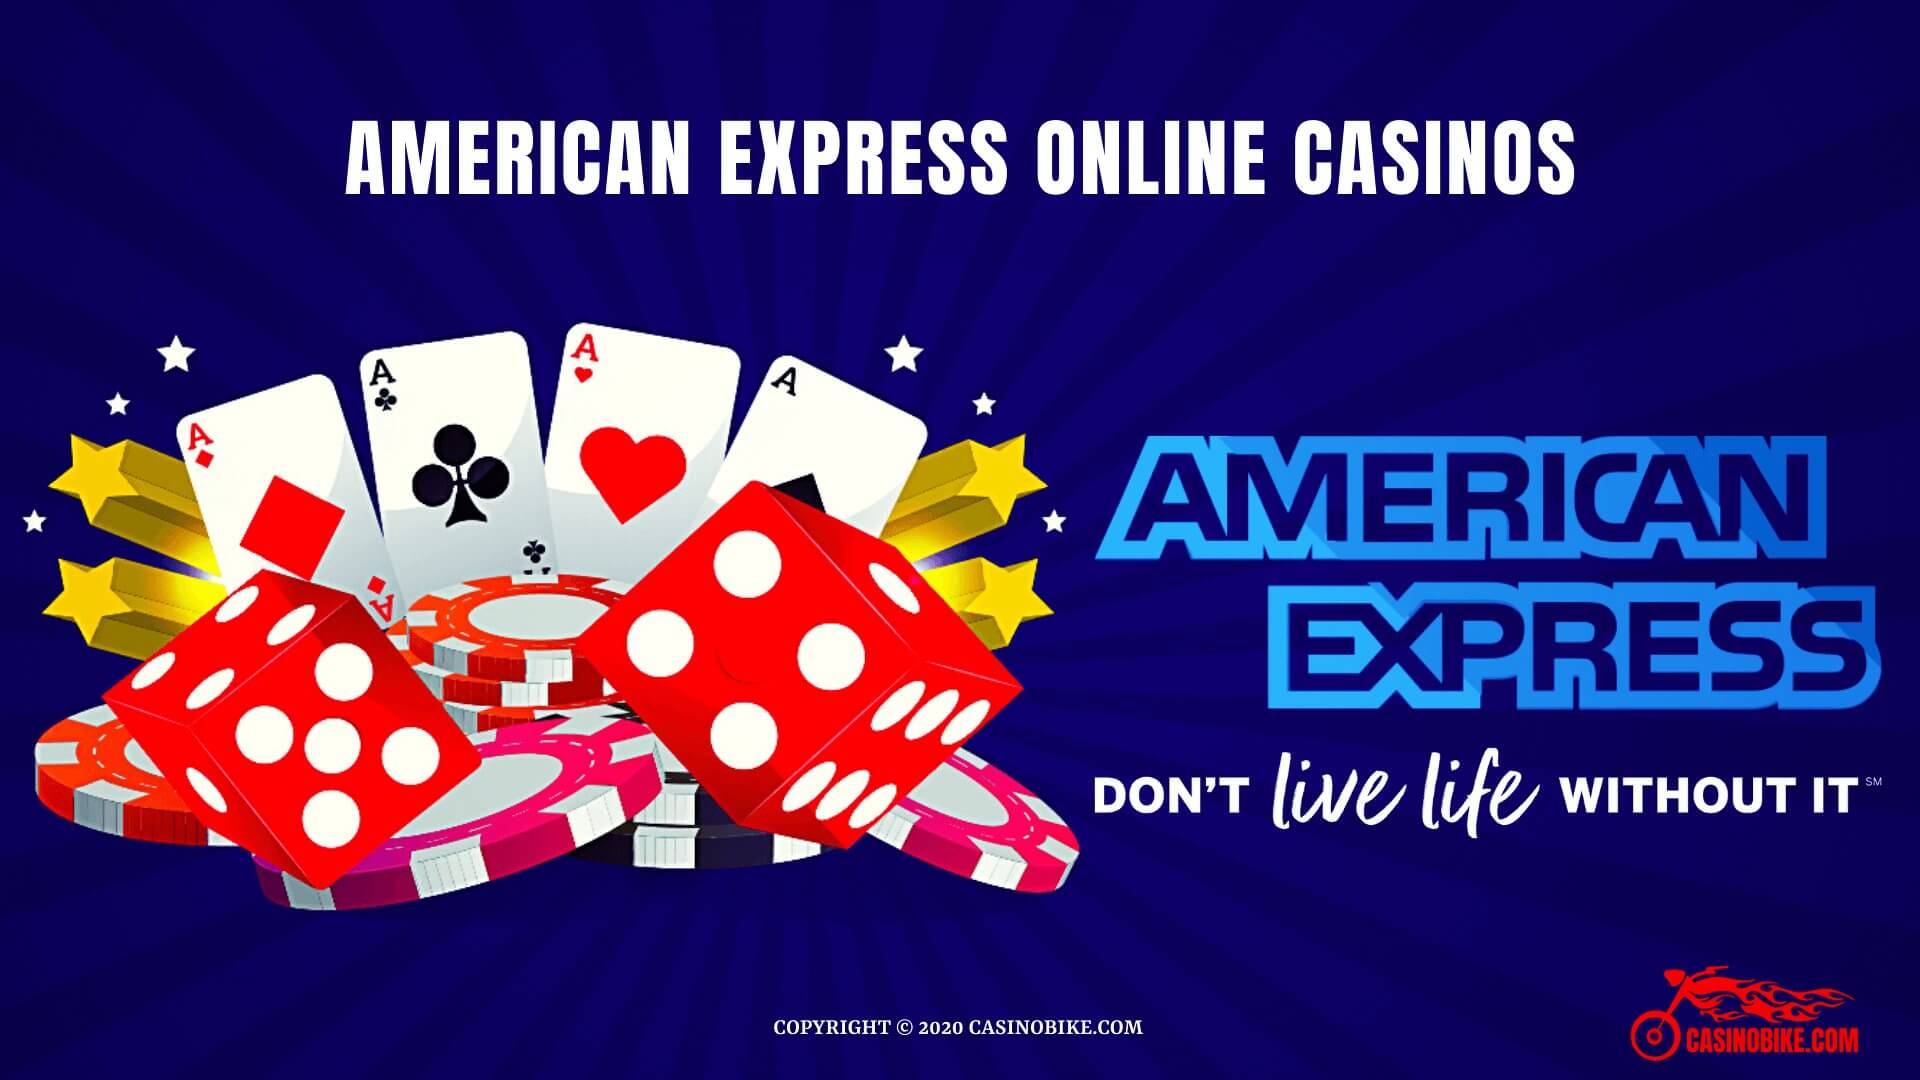 American Express Online Casinos Review